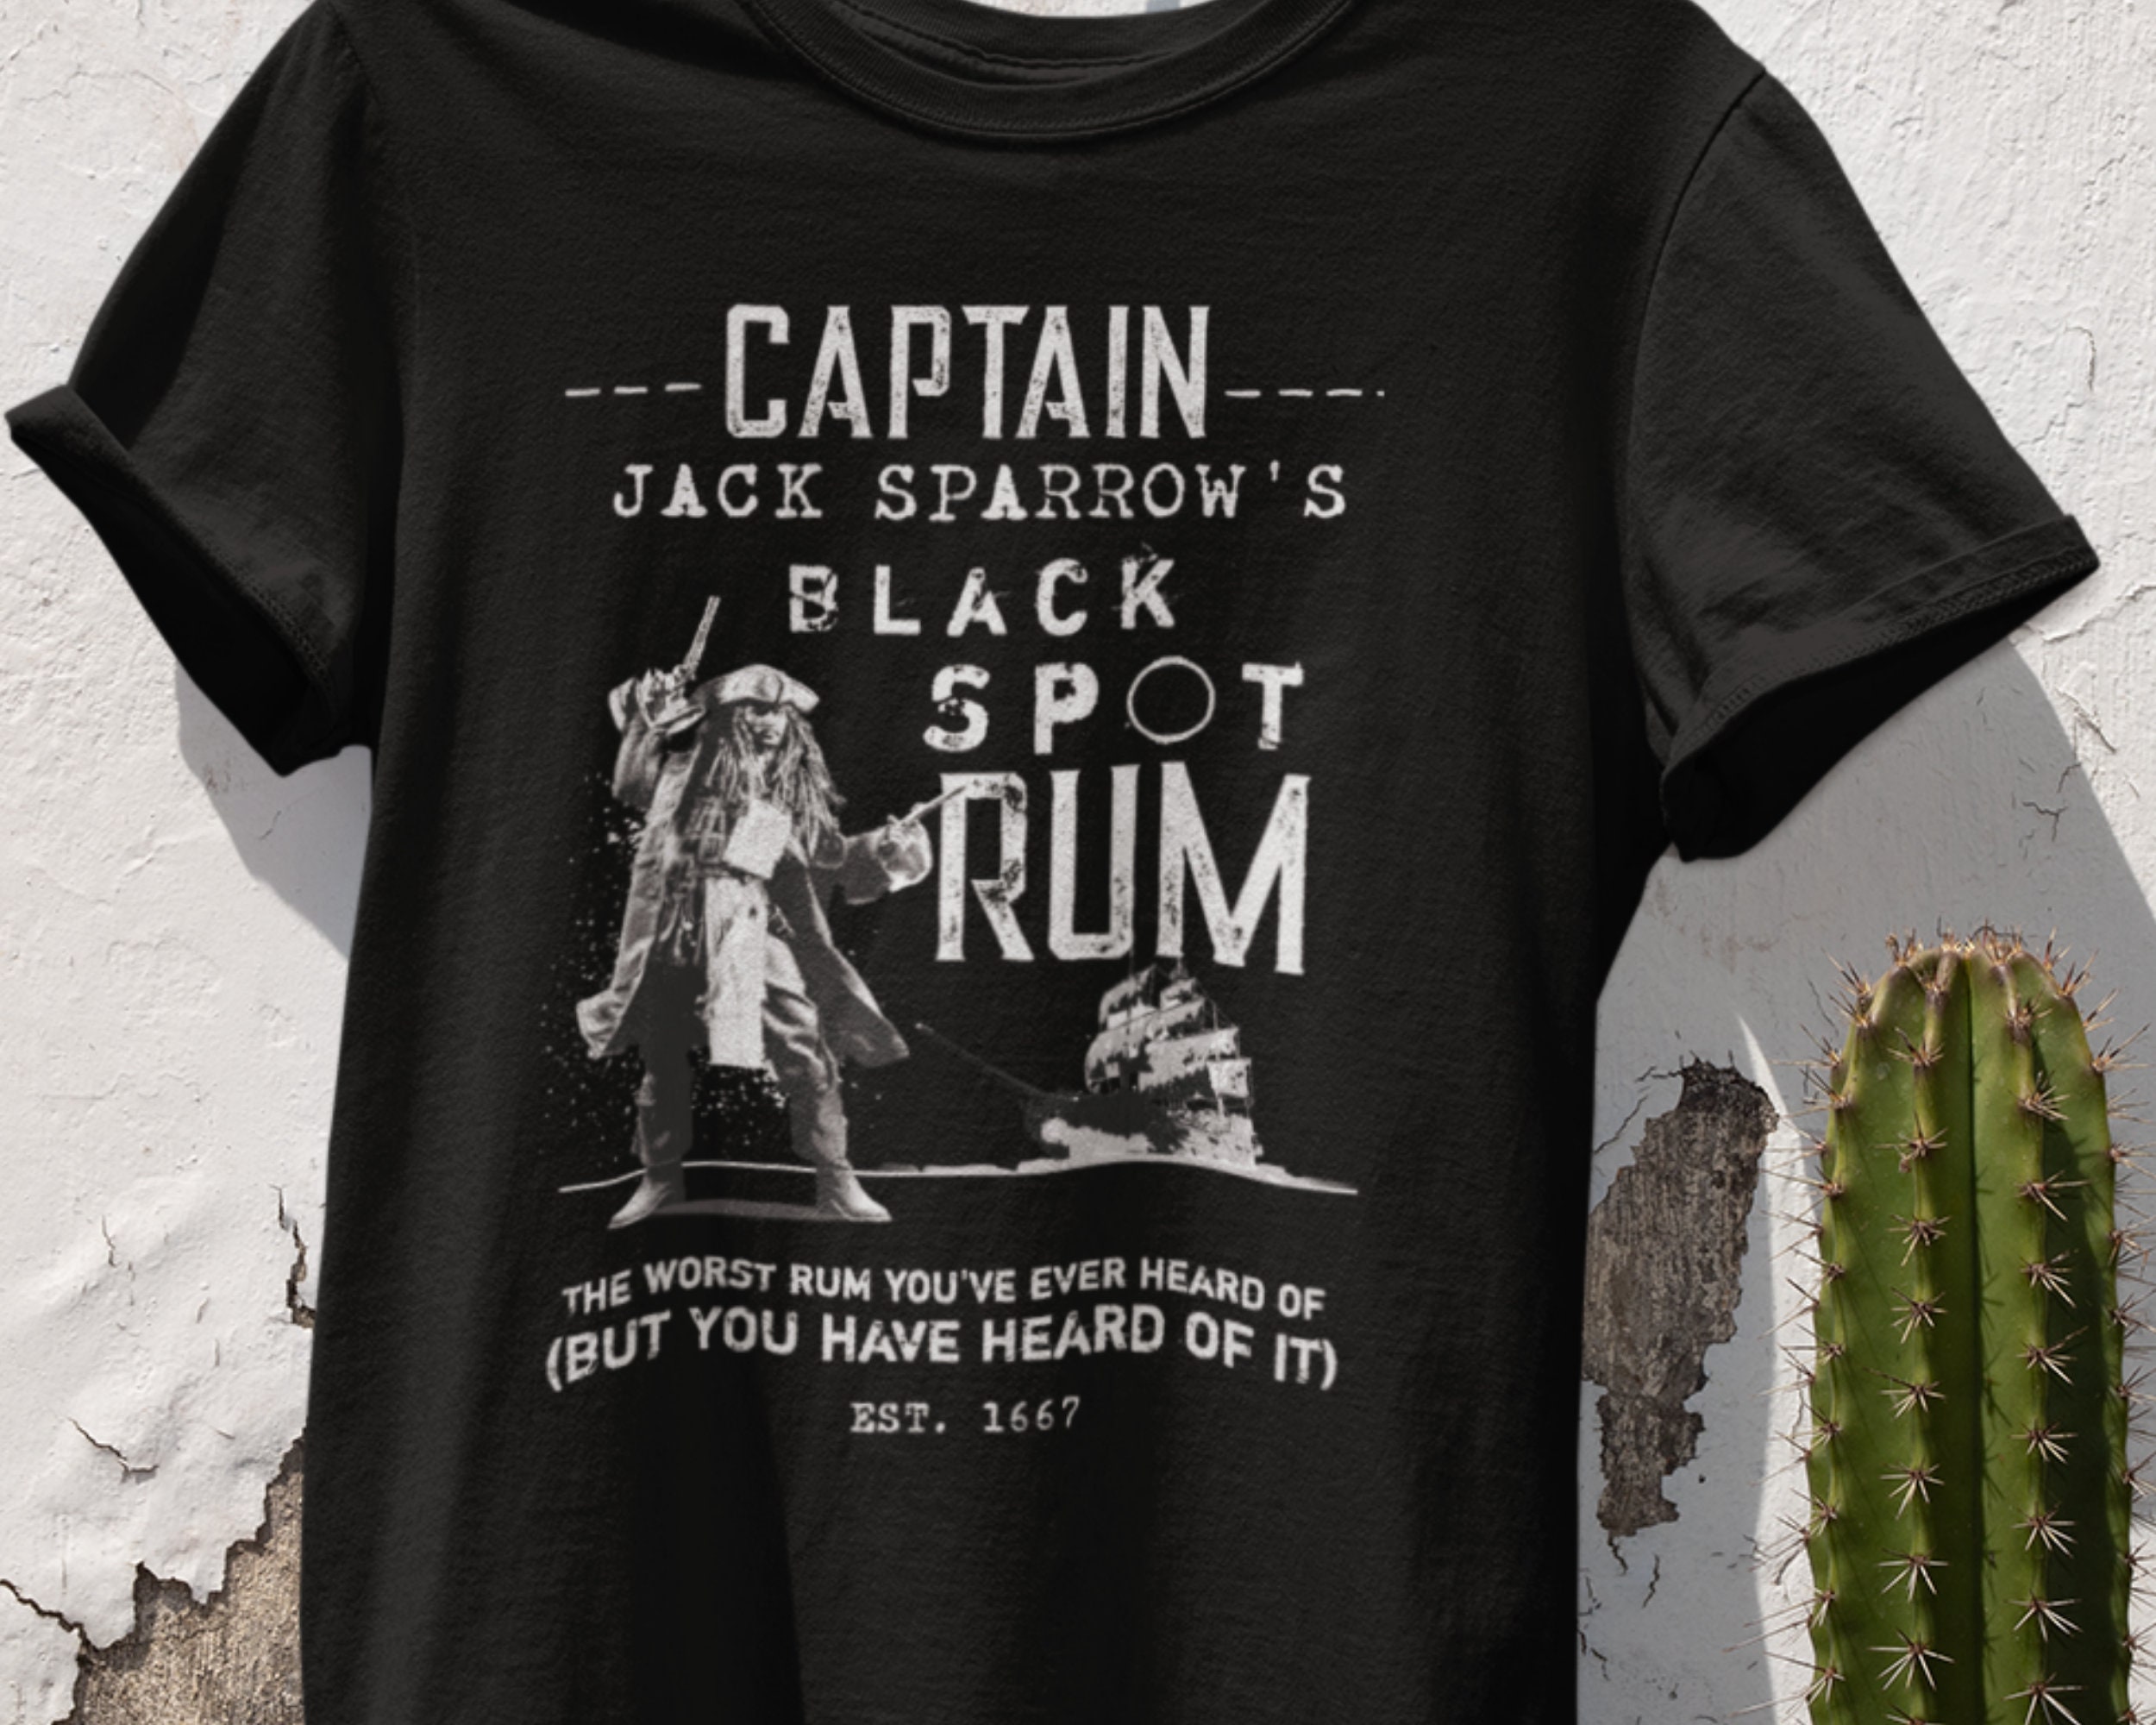 Buy Funny Pirates of the Caribbean T-shirt Vintage Jack Rum Ride Online in  India 